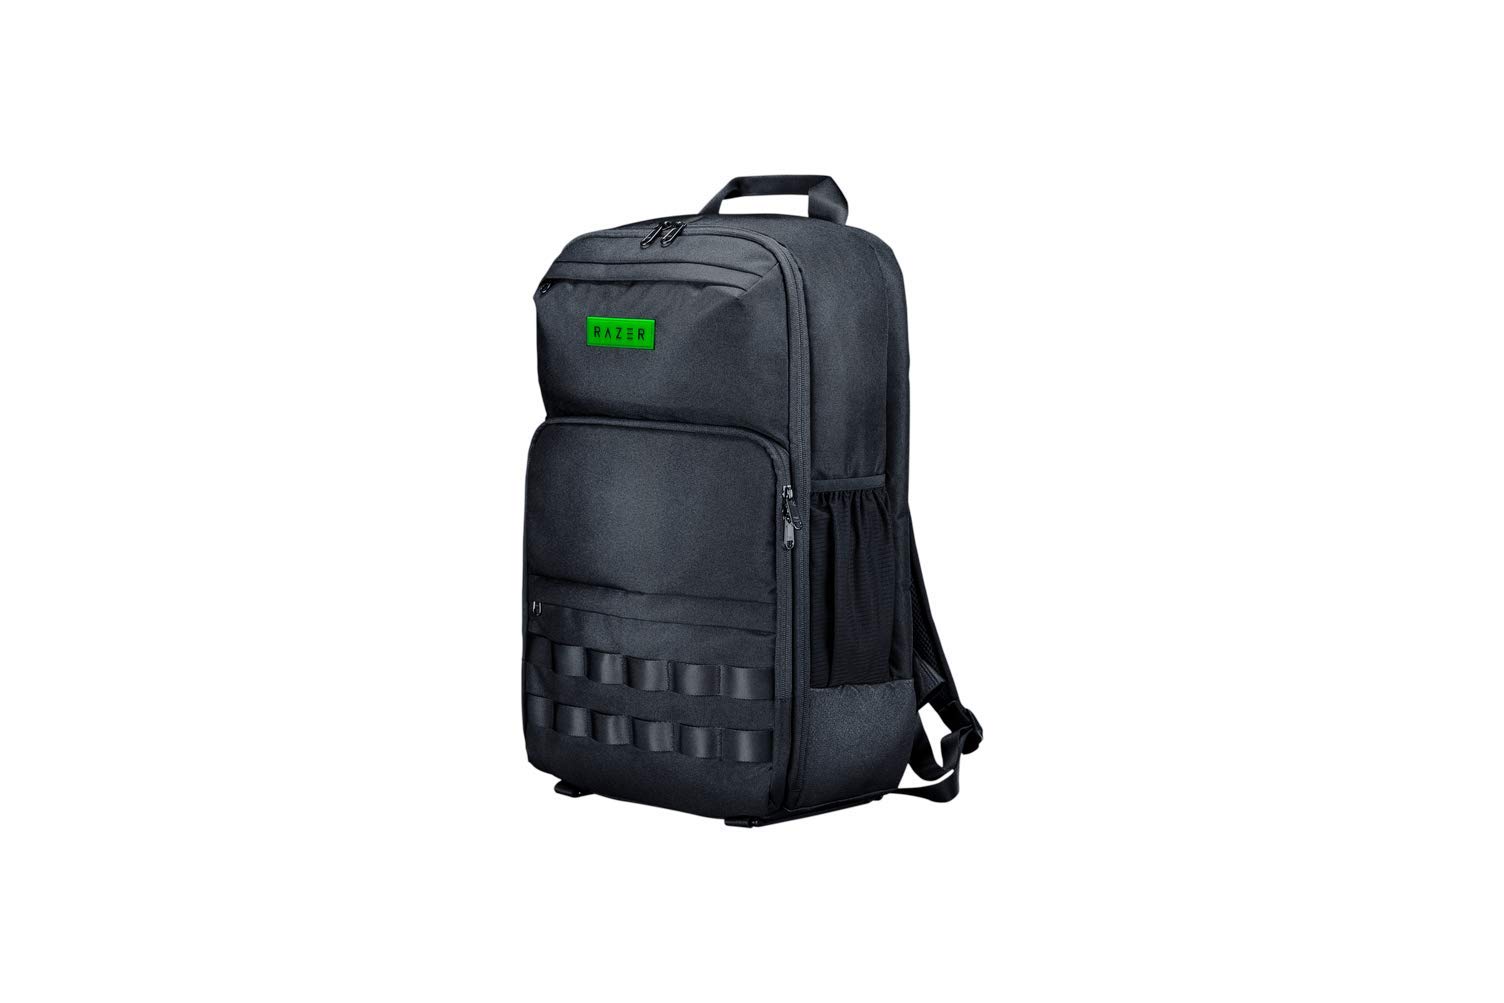 Razer concourse Pro 173 Backpack: Tear Resistant Bottom - Front Utility Flap for greater Accessibility - Scratch-Proof Interior